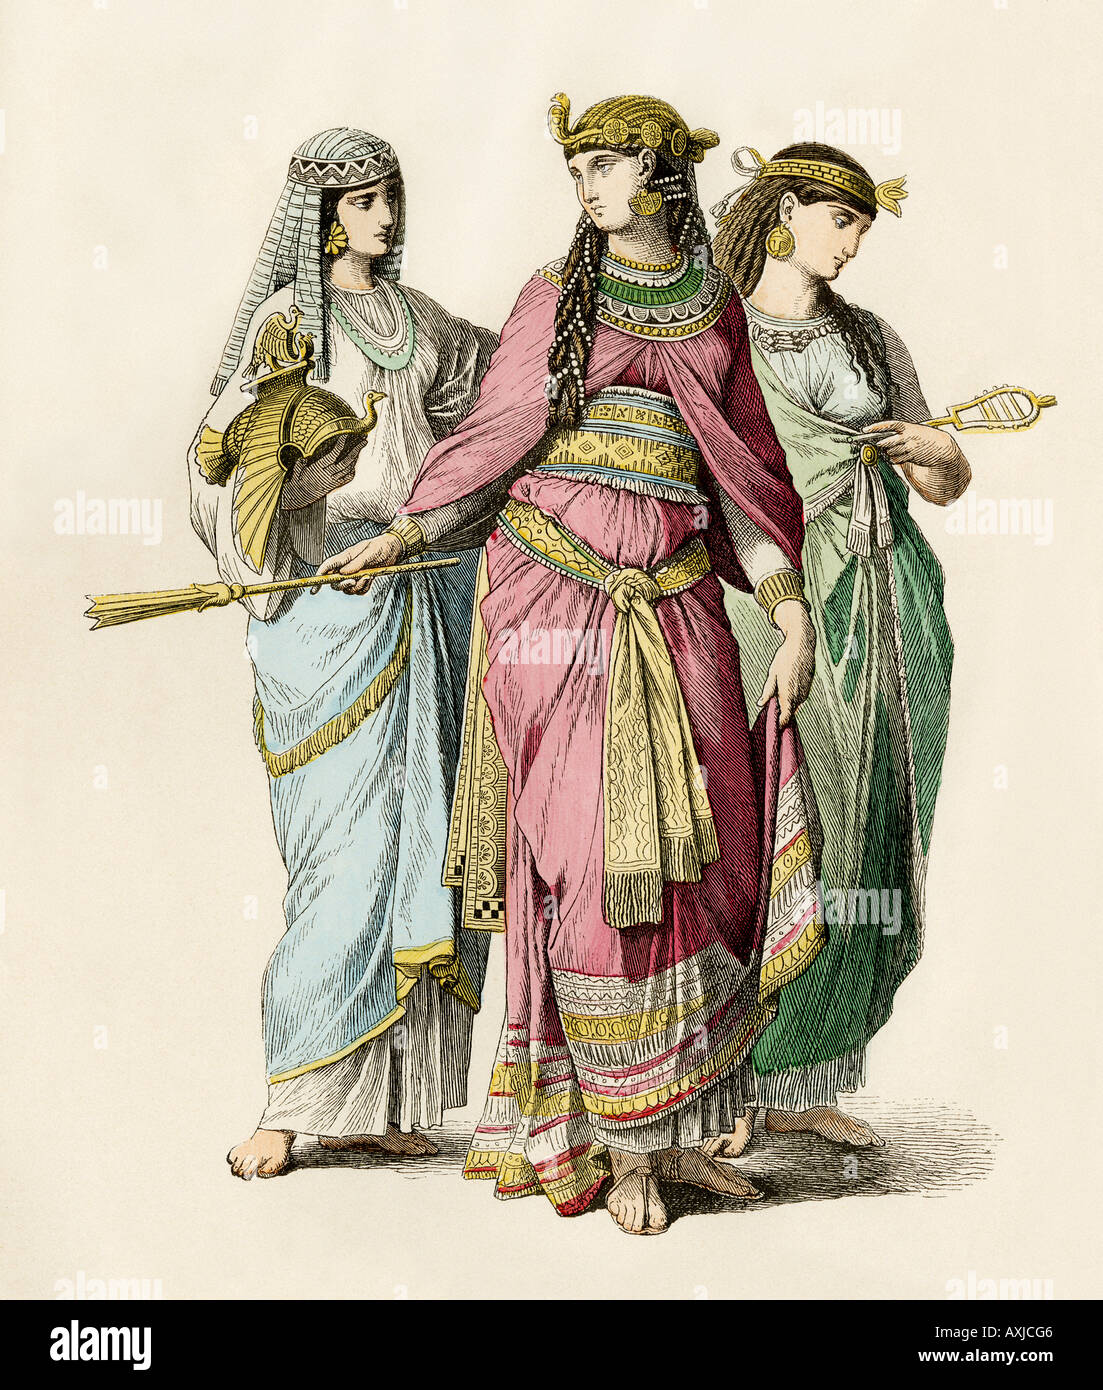 Ancient Egyptian queen and attendants. Hand-colored print Stock Photo